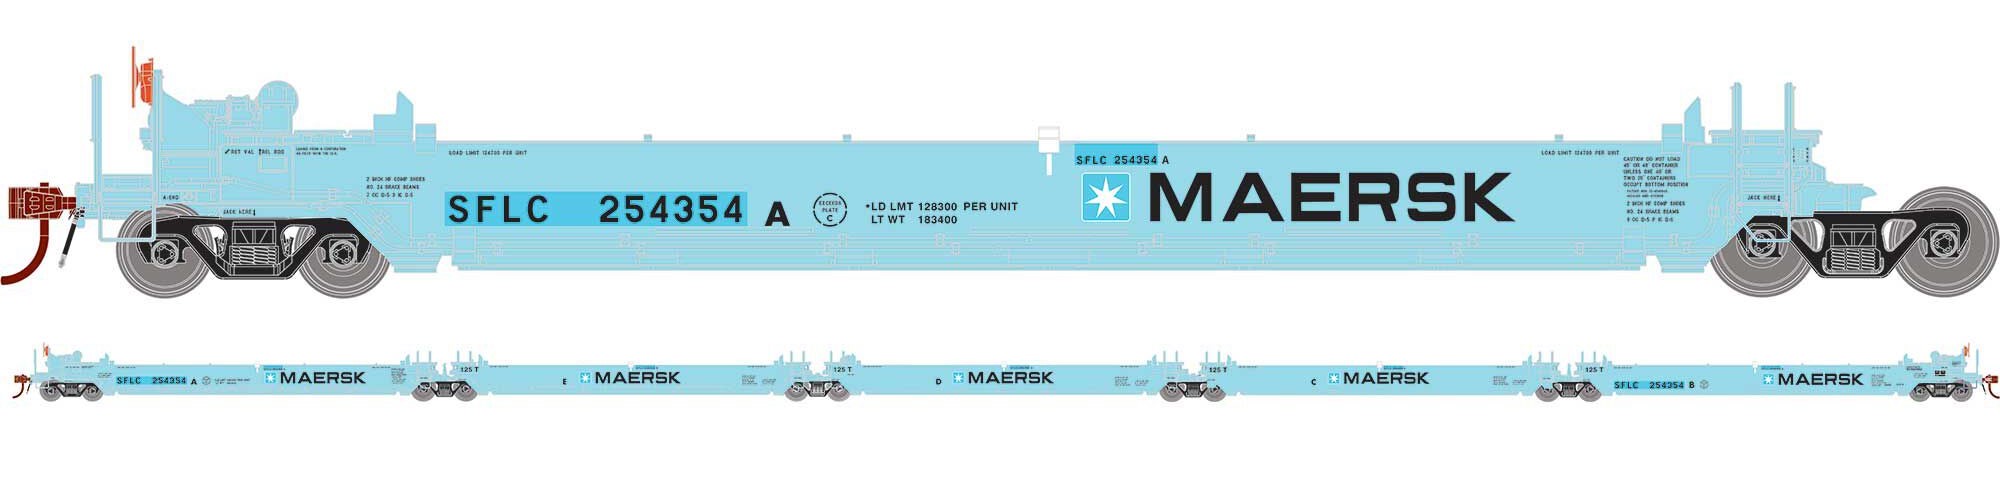 Athearn RTR HO ATH98923 Maxi I Articulated Well Cars 5-unit 'MAERSK' SFLC #254354